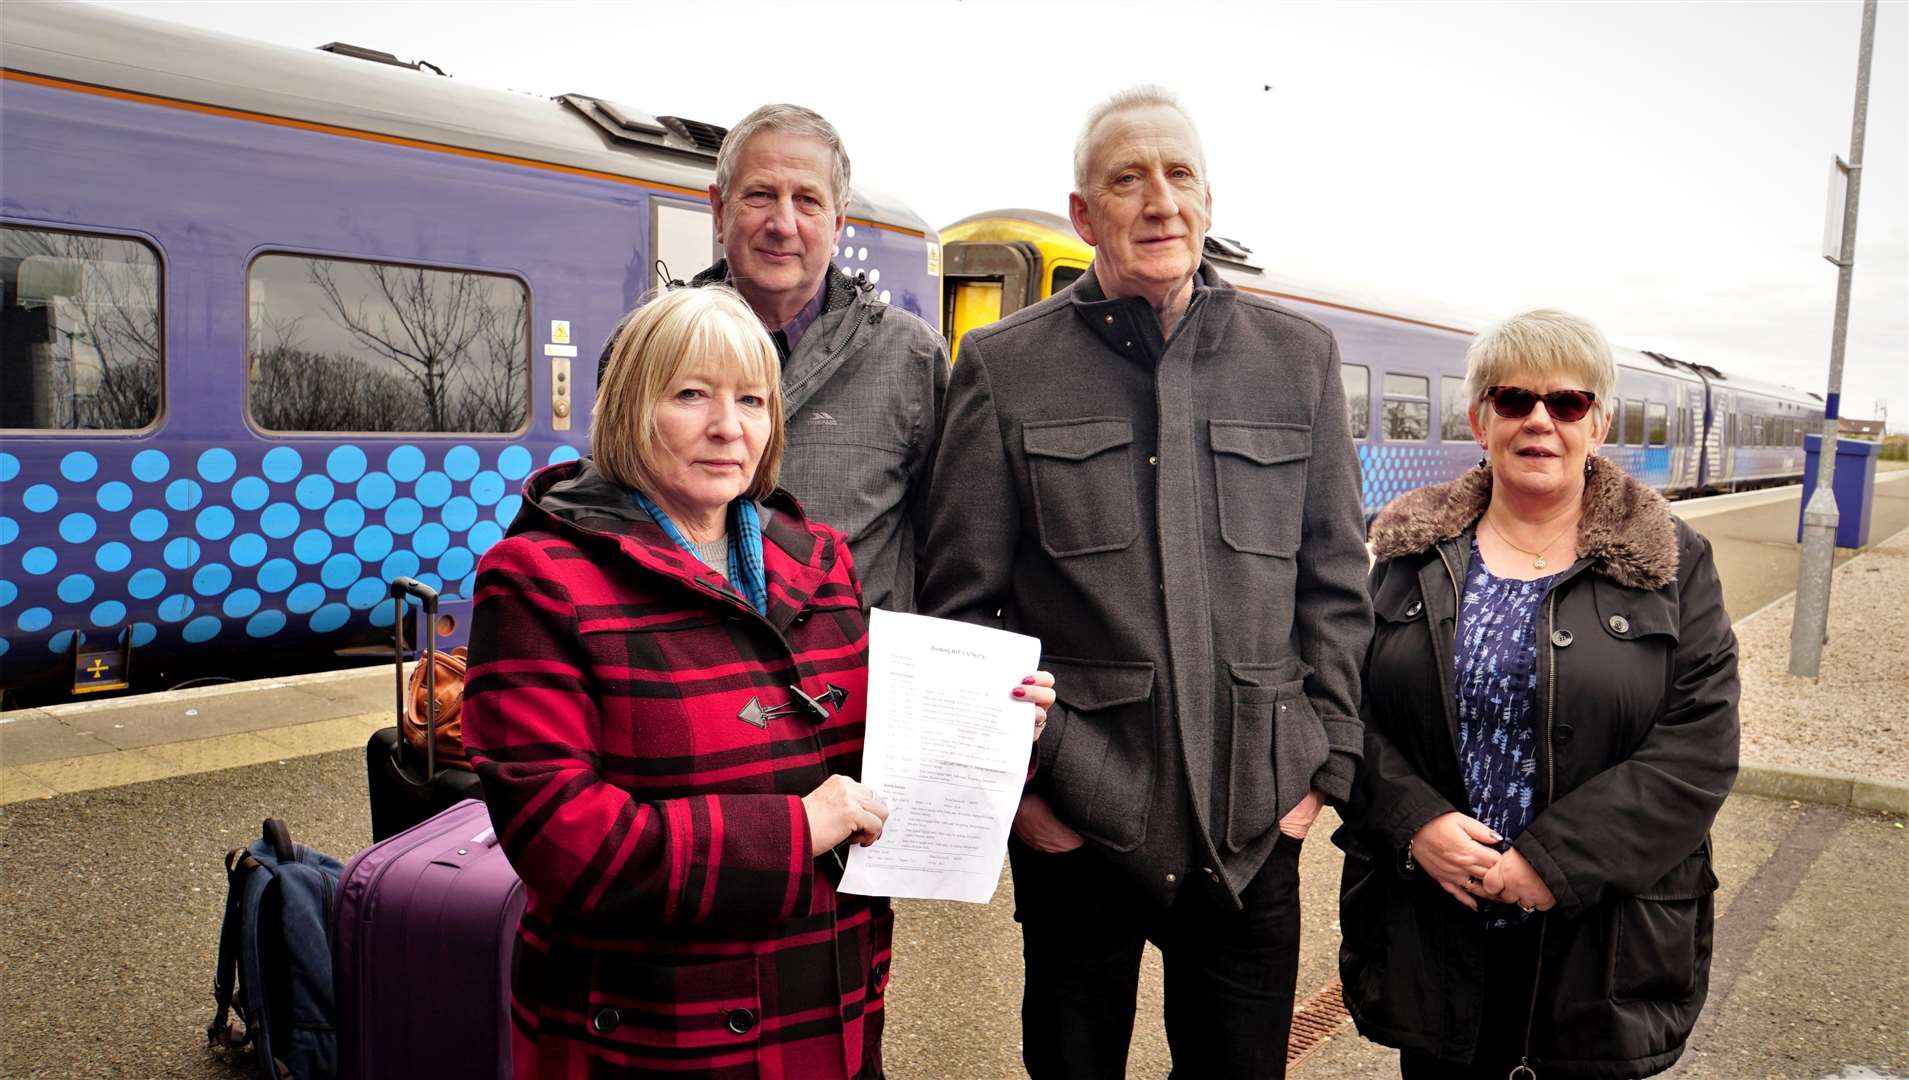 From left, Theresa and Jim Coull together with Charlie and Fiona Simpson. These two couples had travelled up from Keith to Wick on Friday and said there was a staffing problem on their outward journey as well. Picture: DGS